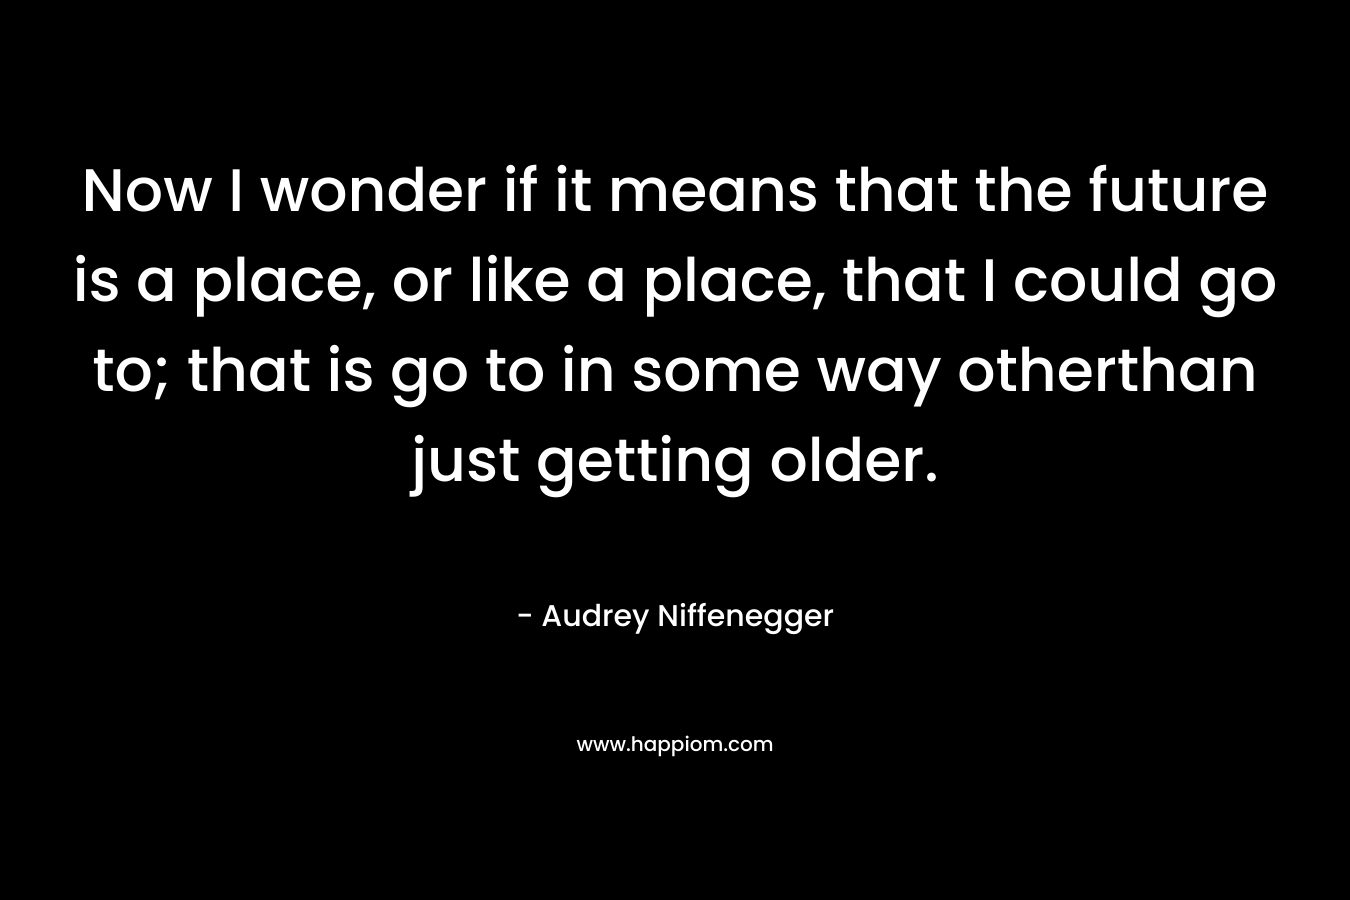 Now I wonder if it means that the future is a place, or like a place, that I could go to; that is go to in some way otherthan just getting older.